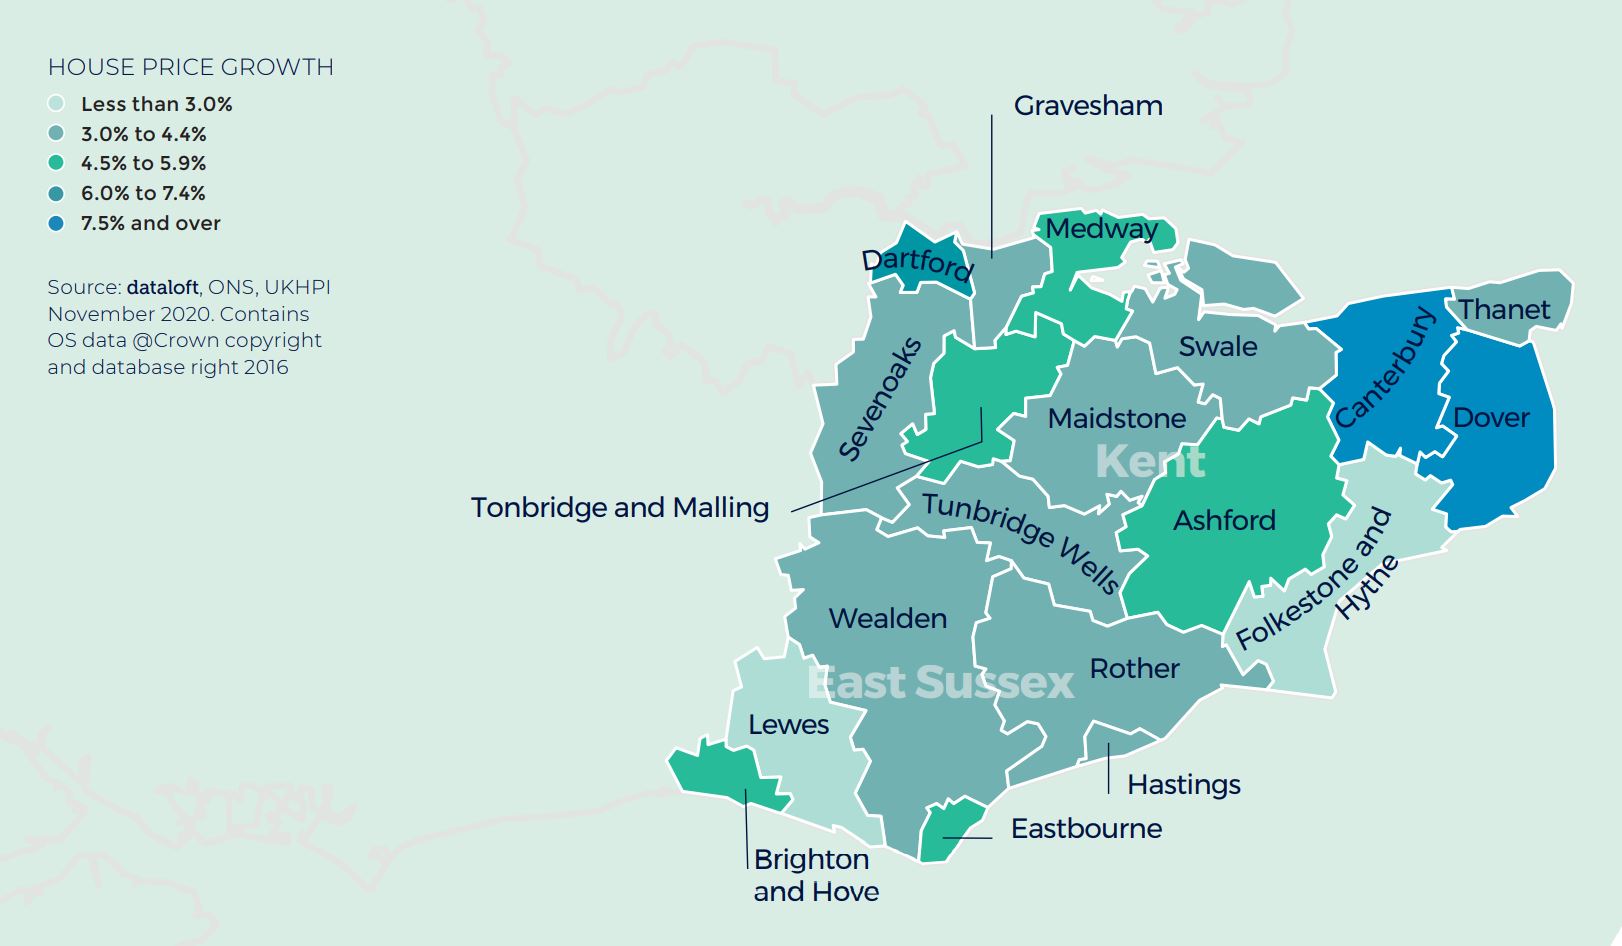 south east home counties kent east sussex regional property market report house price growth